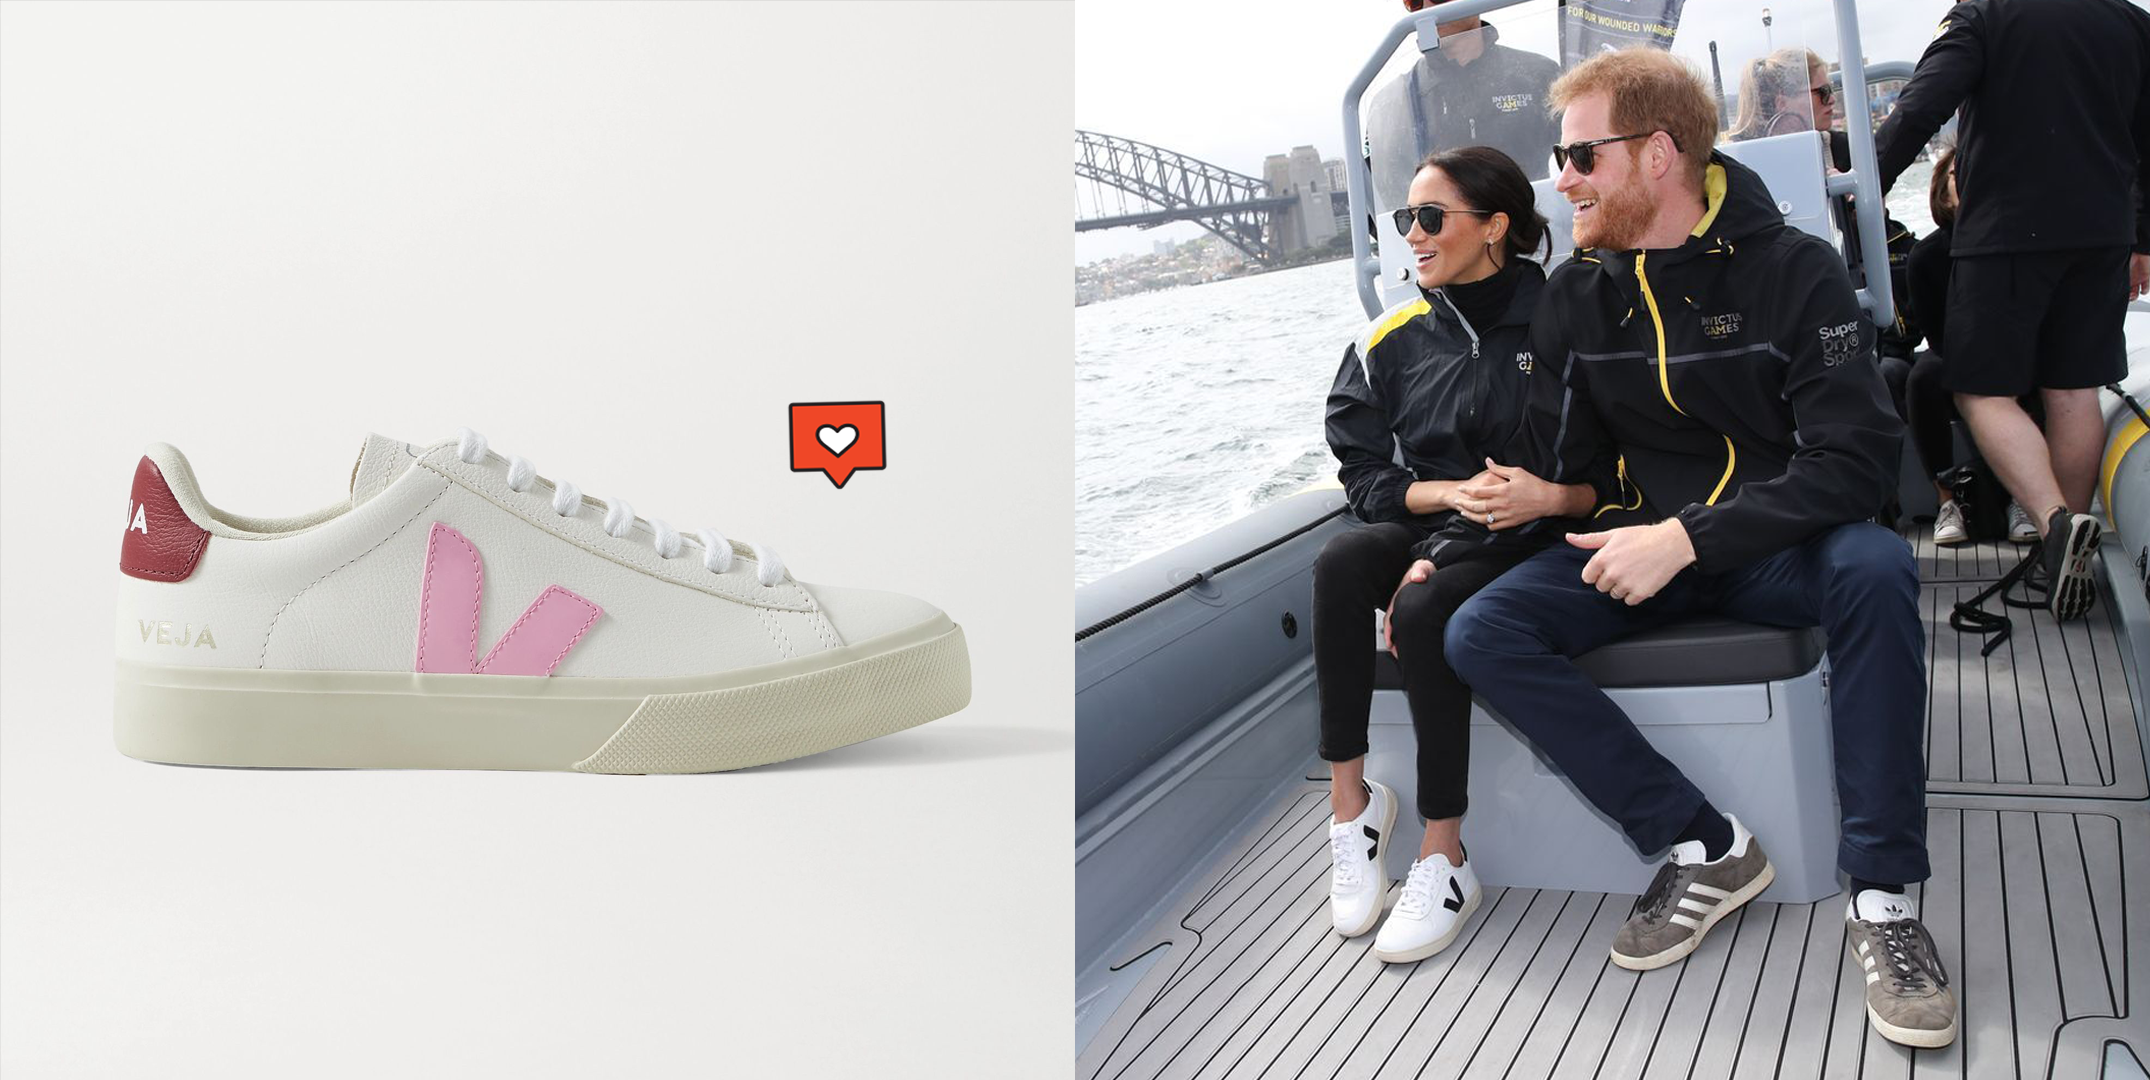 Meghan Markle's Veja Sneakers Are on Sale 2021 — Where Buy Meghan Markle's Exact Sneakers